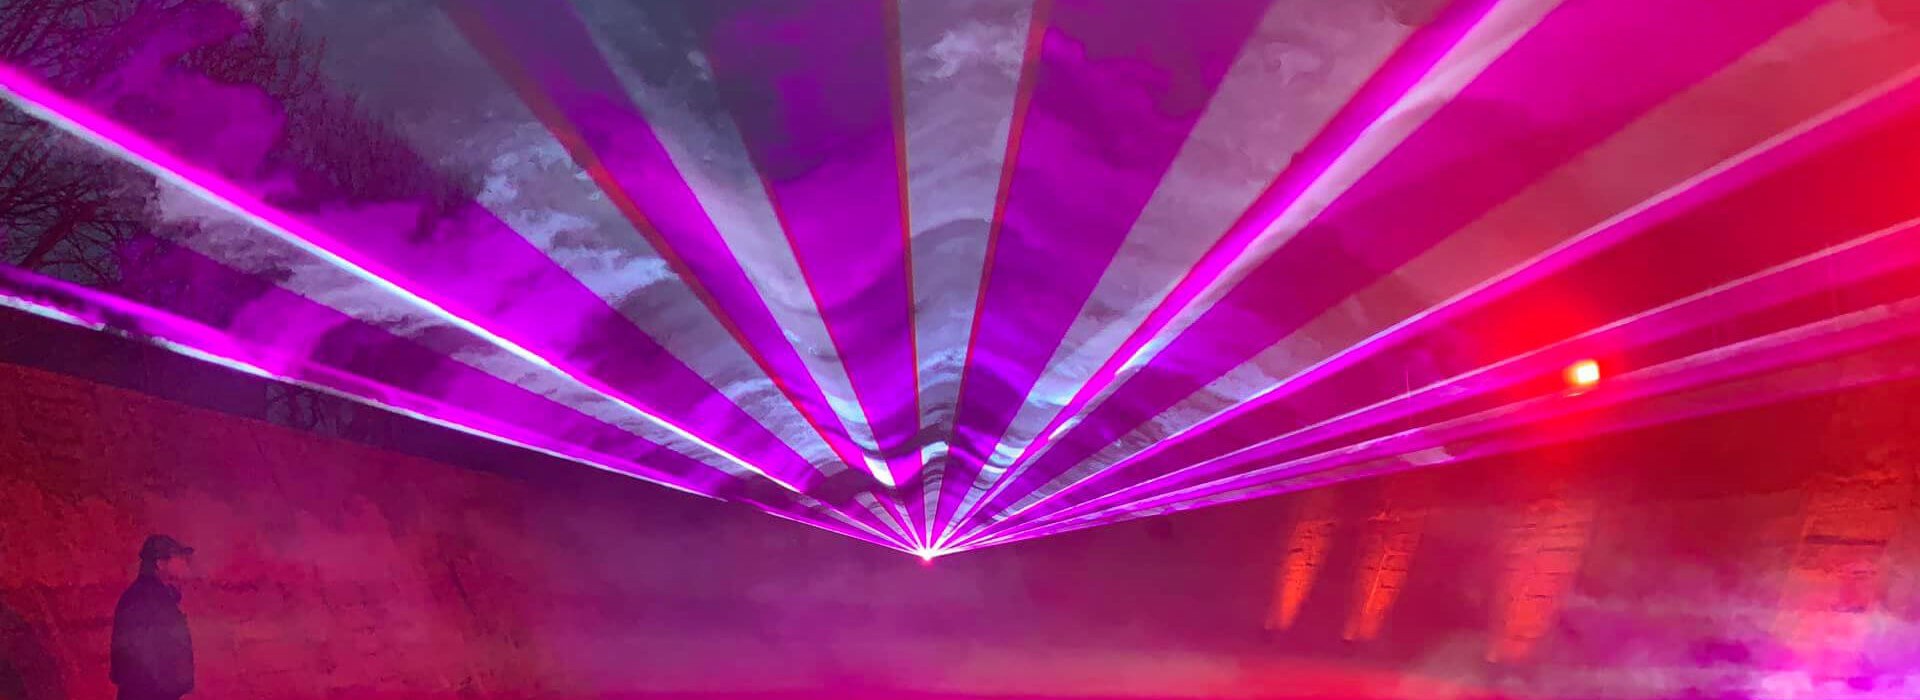 Q-Stall Arena Lasershow